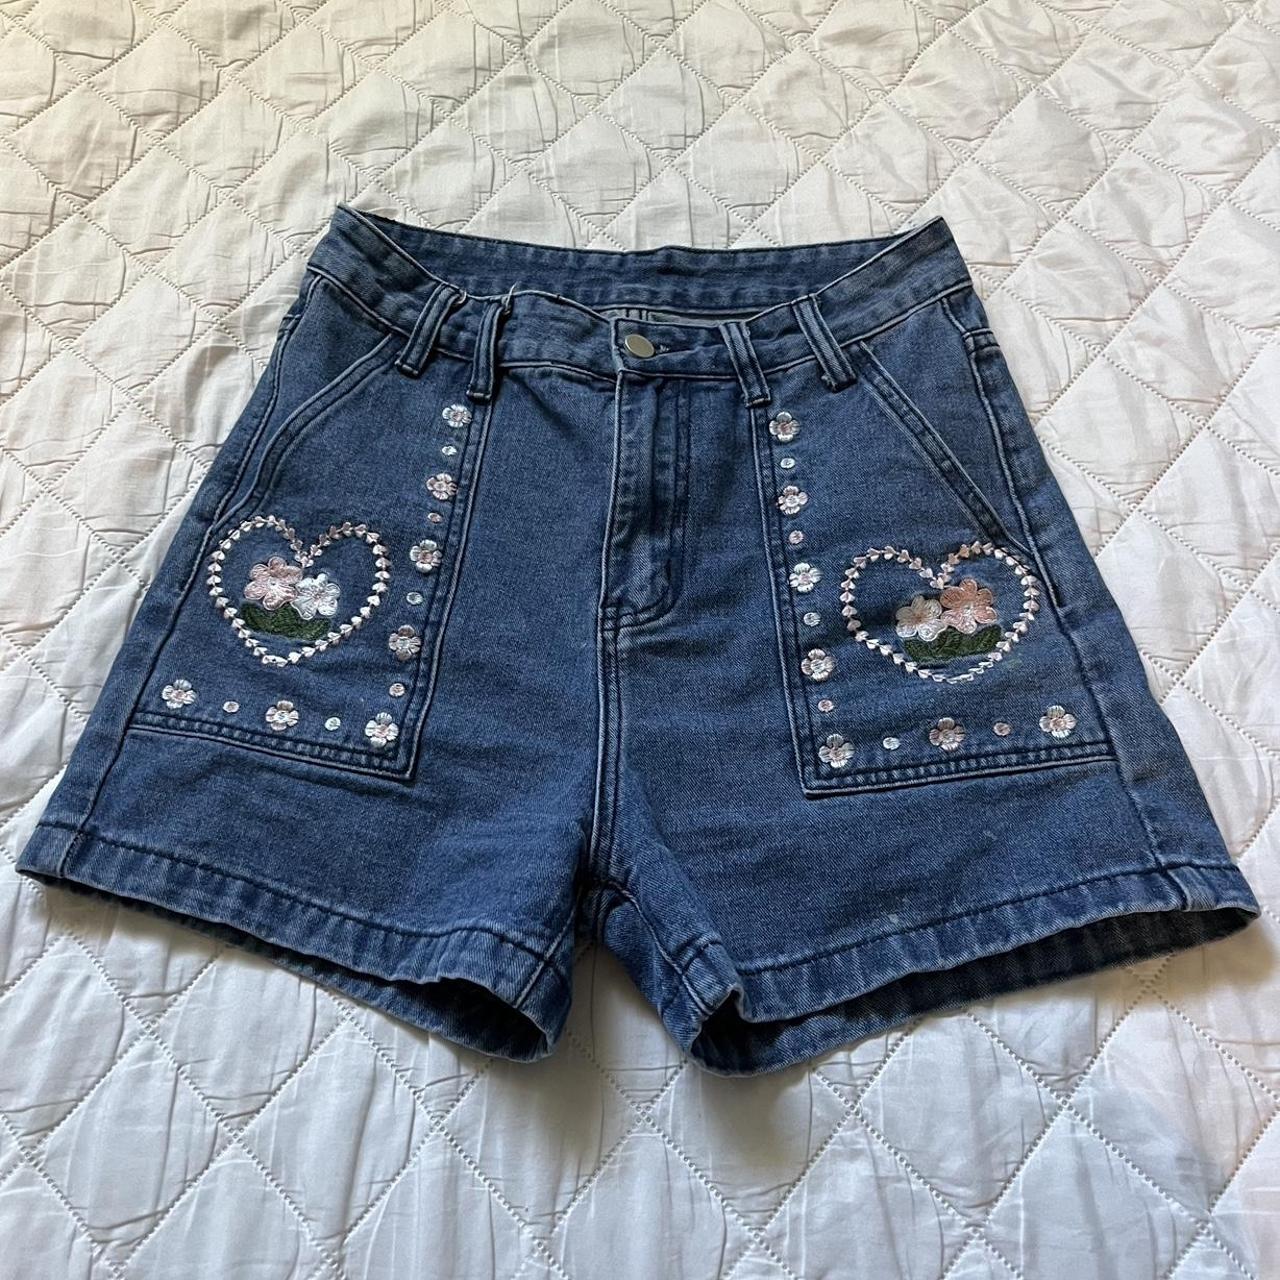 Coquette jean embroidered shorts🎀🤍 — So cute they... - Depop